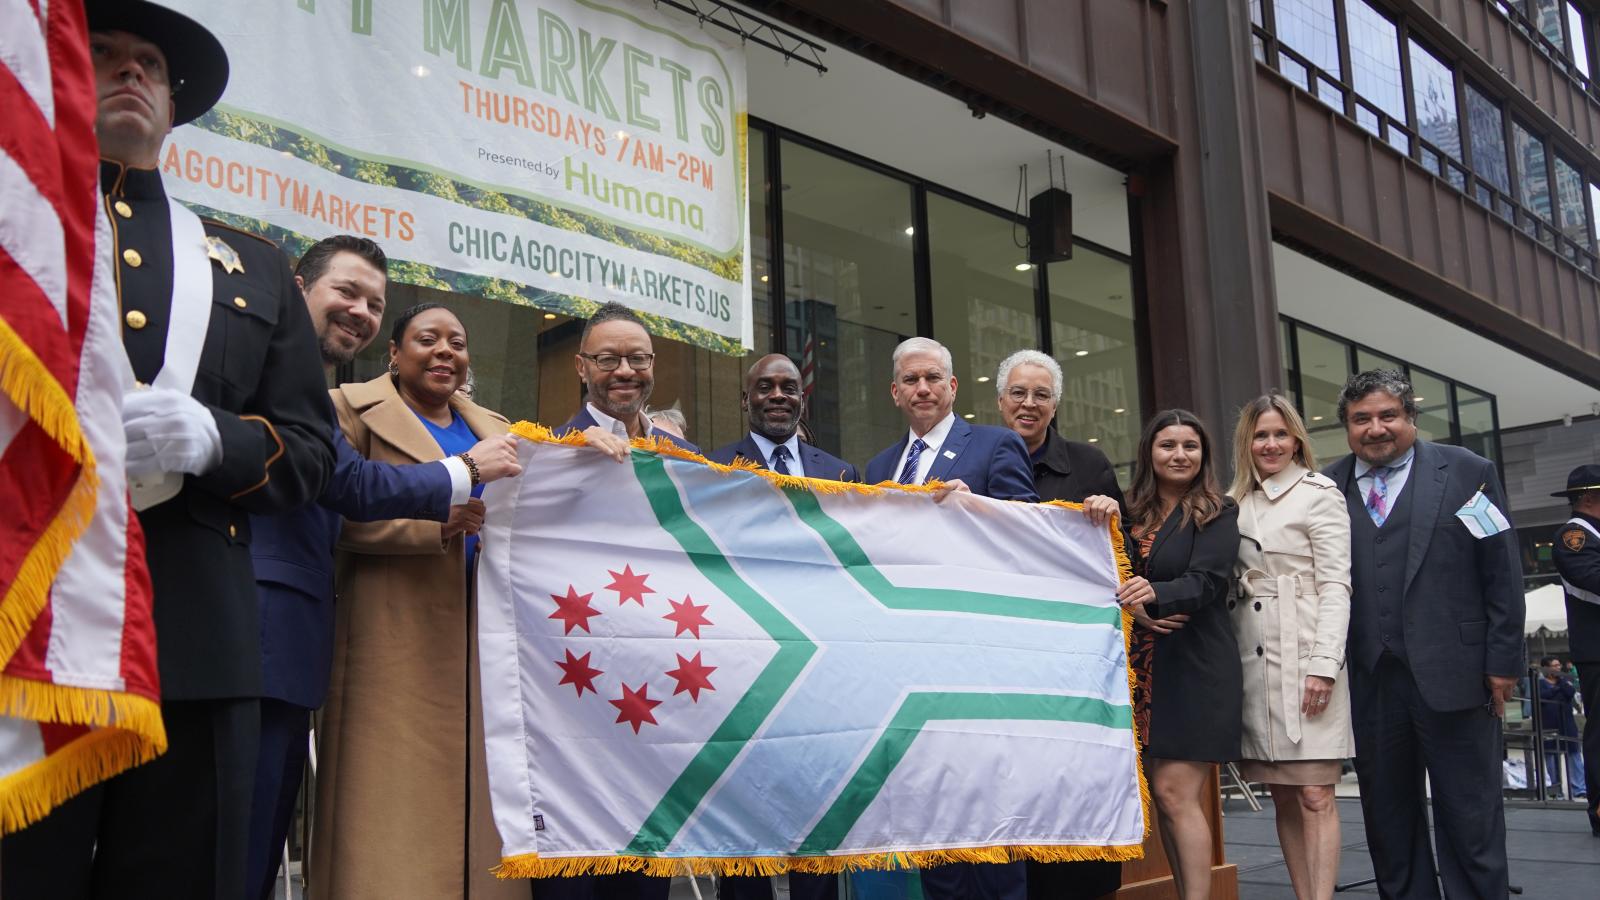 Cook County Officials standing with Cook County flag